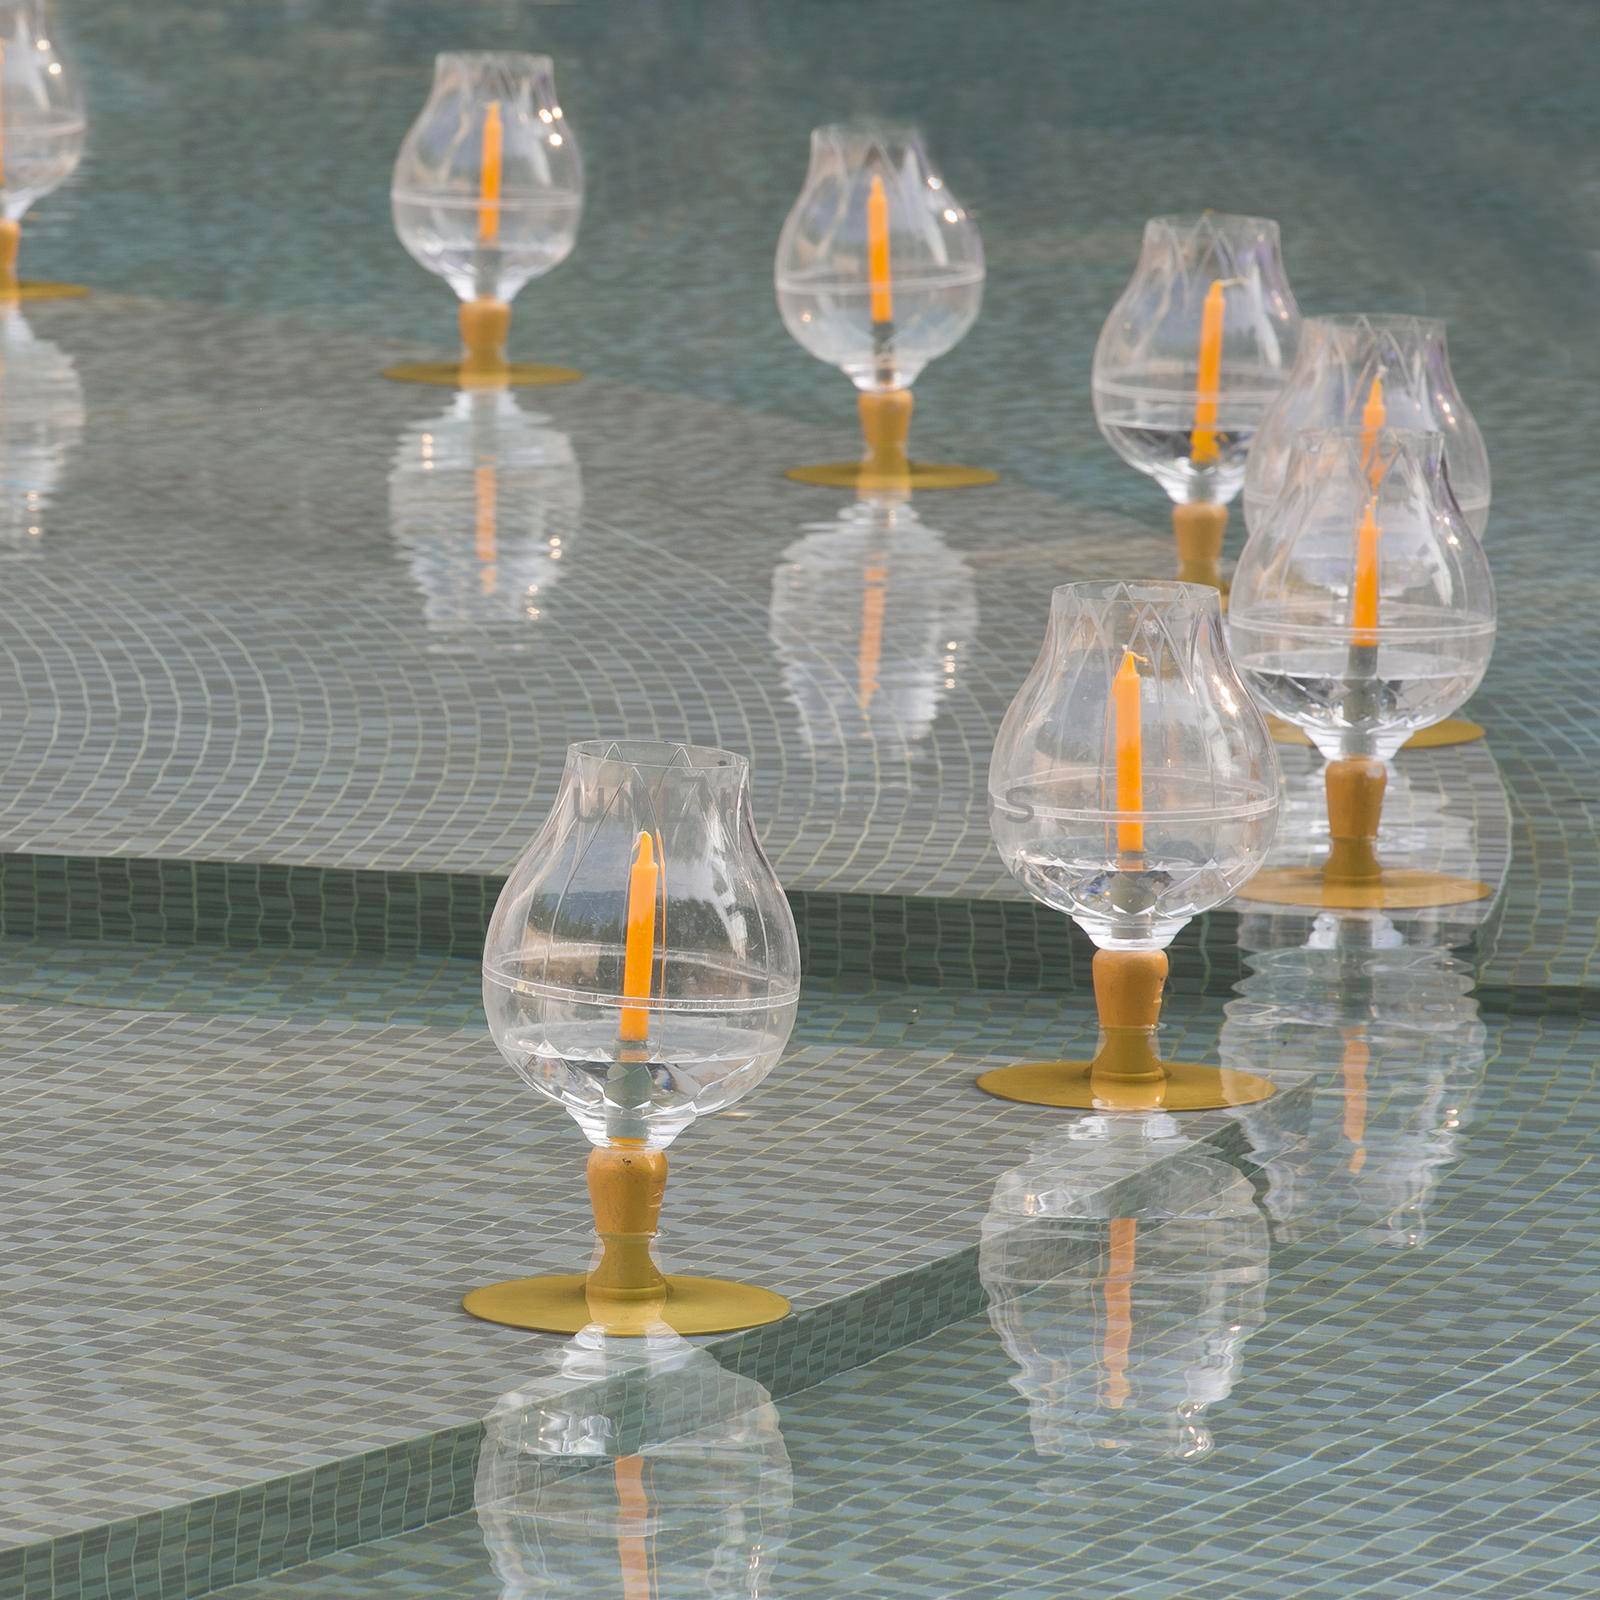 Glass candle holder for candles in Buddhism by titipong